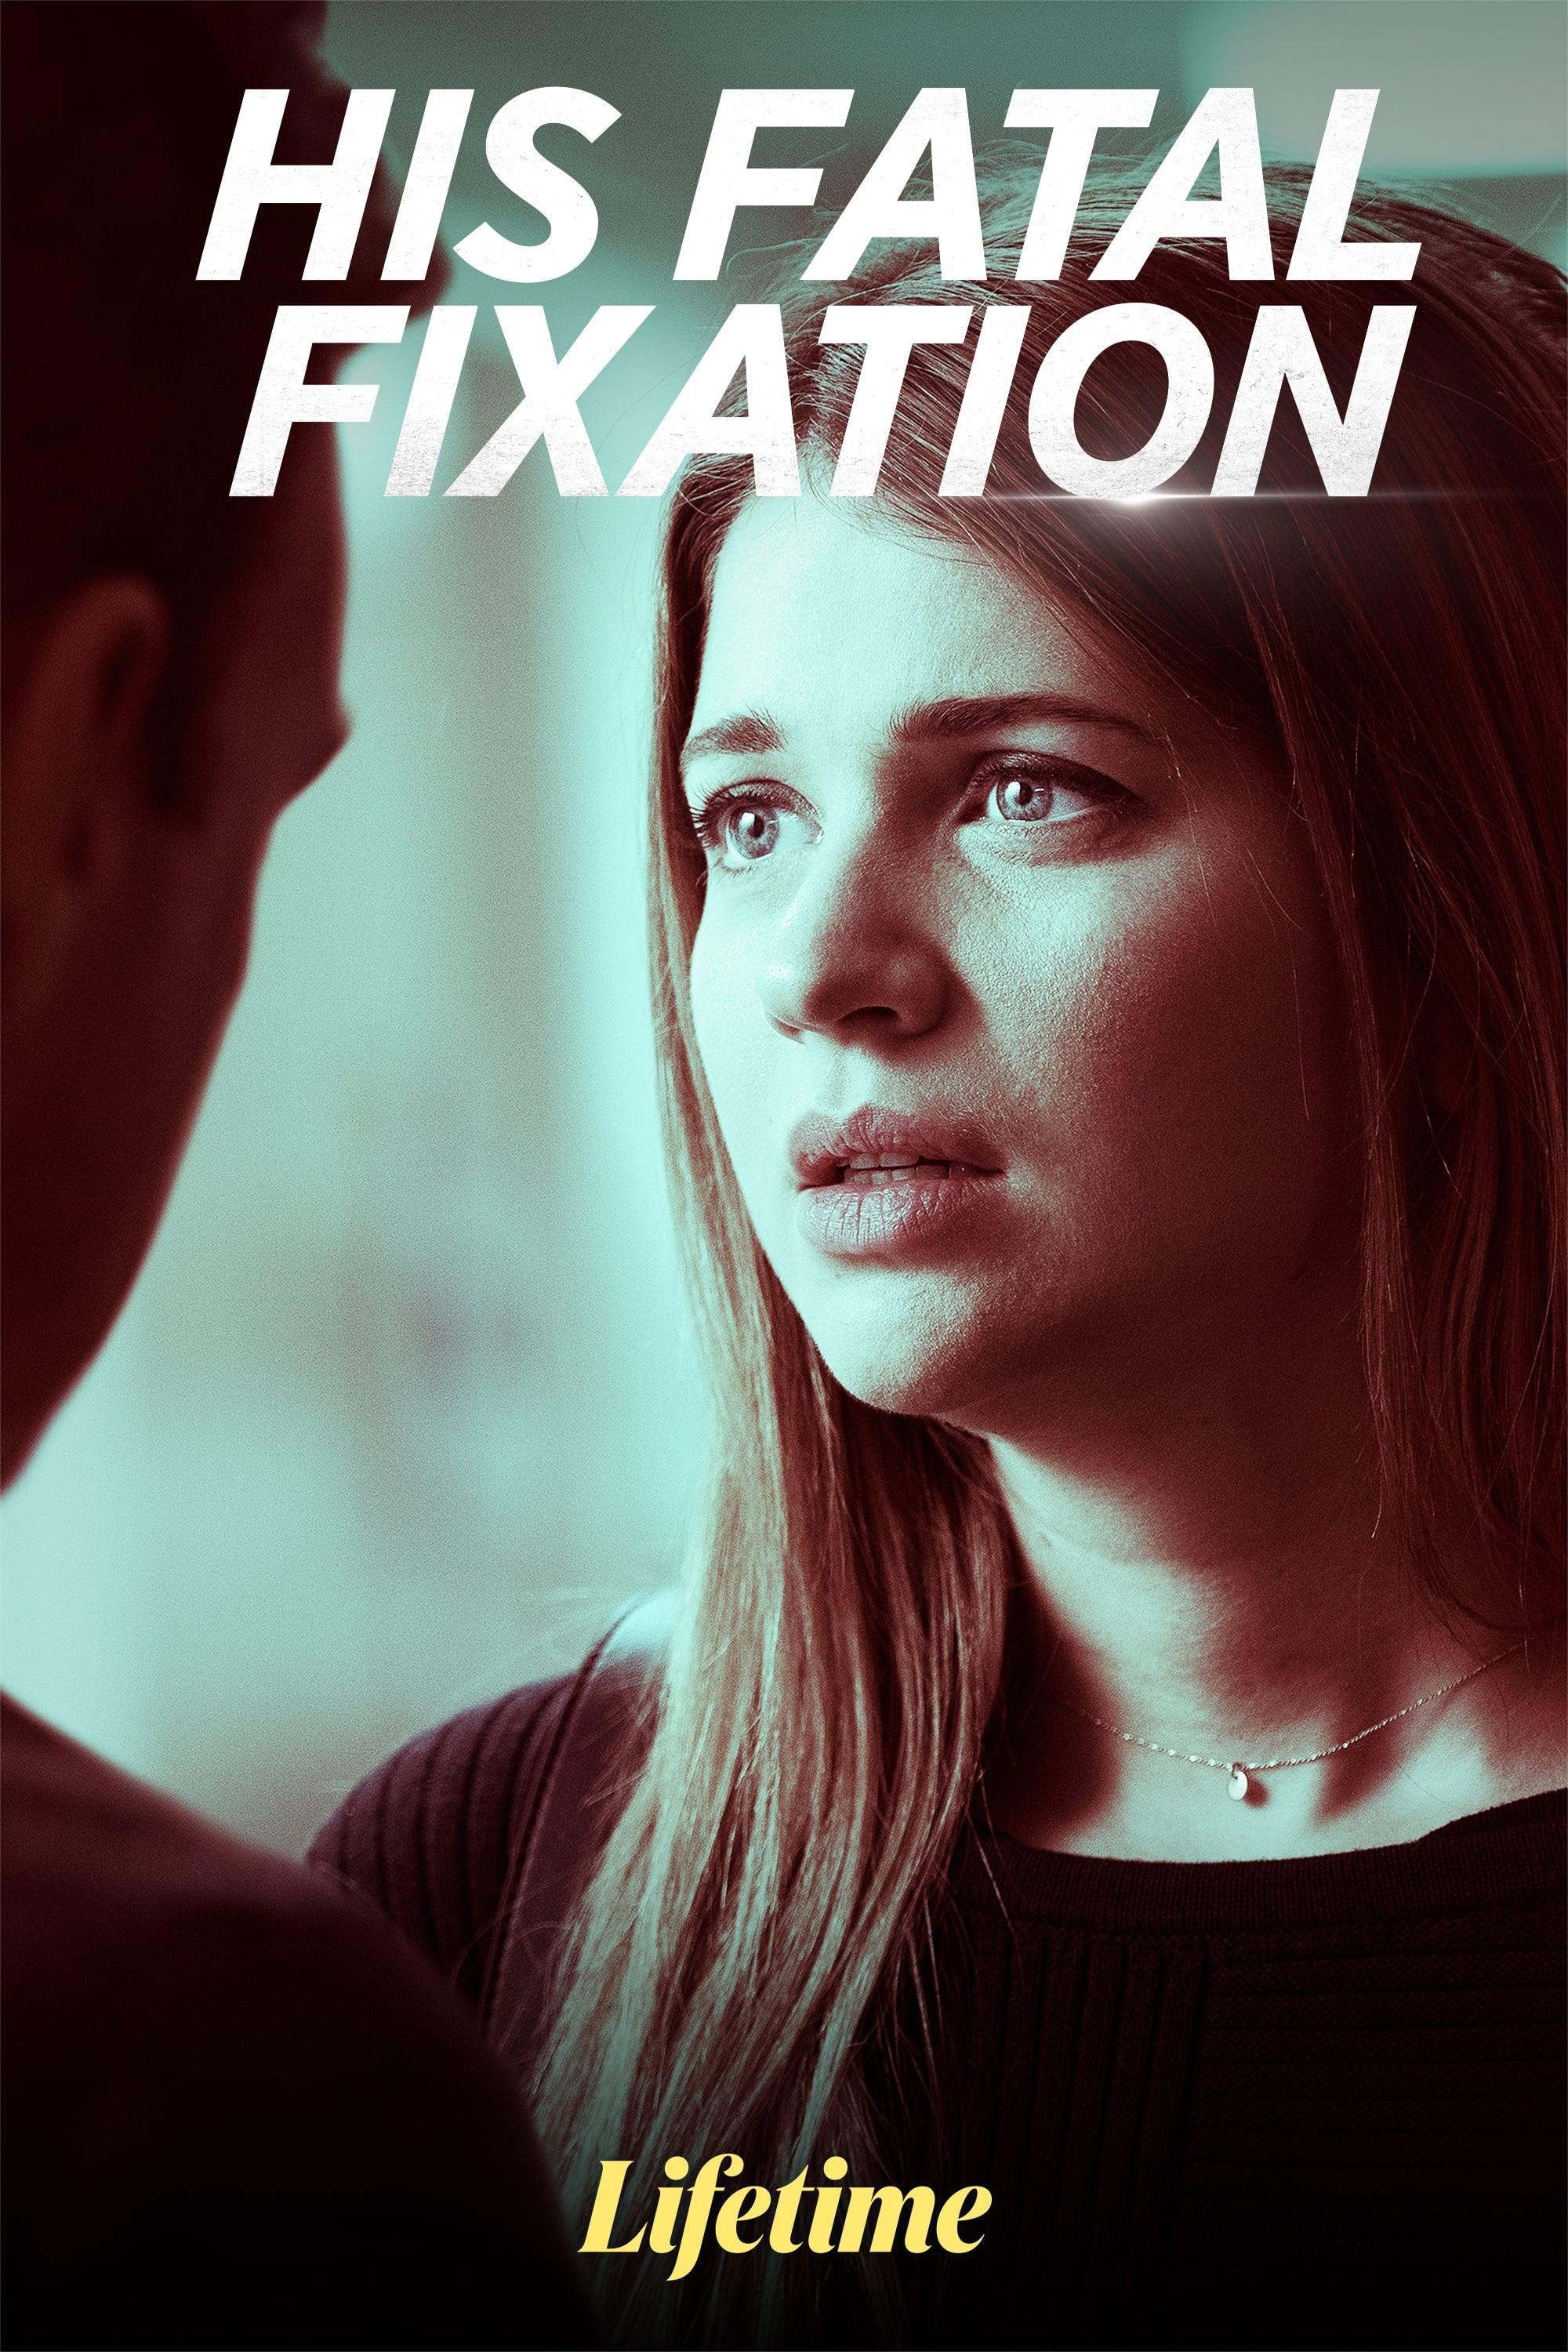 His Fatal Fixation poster